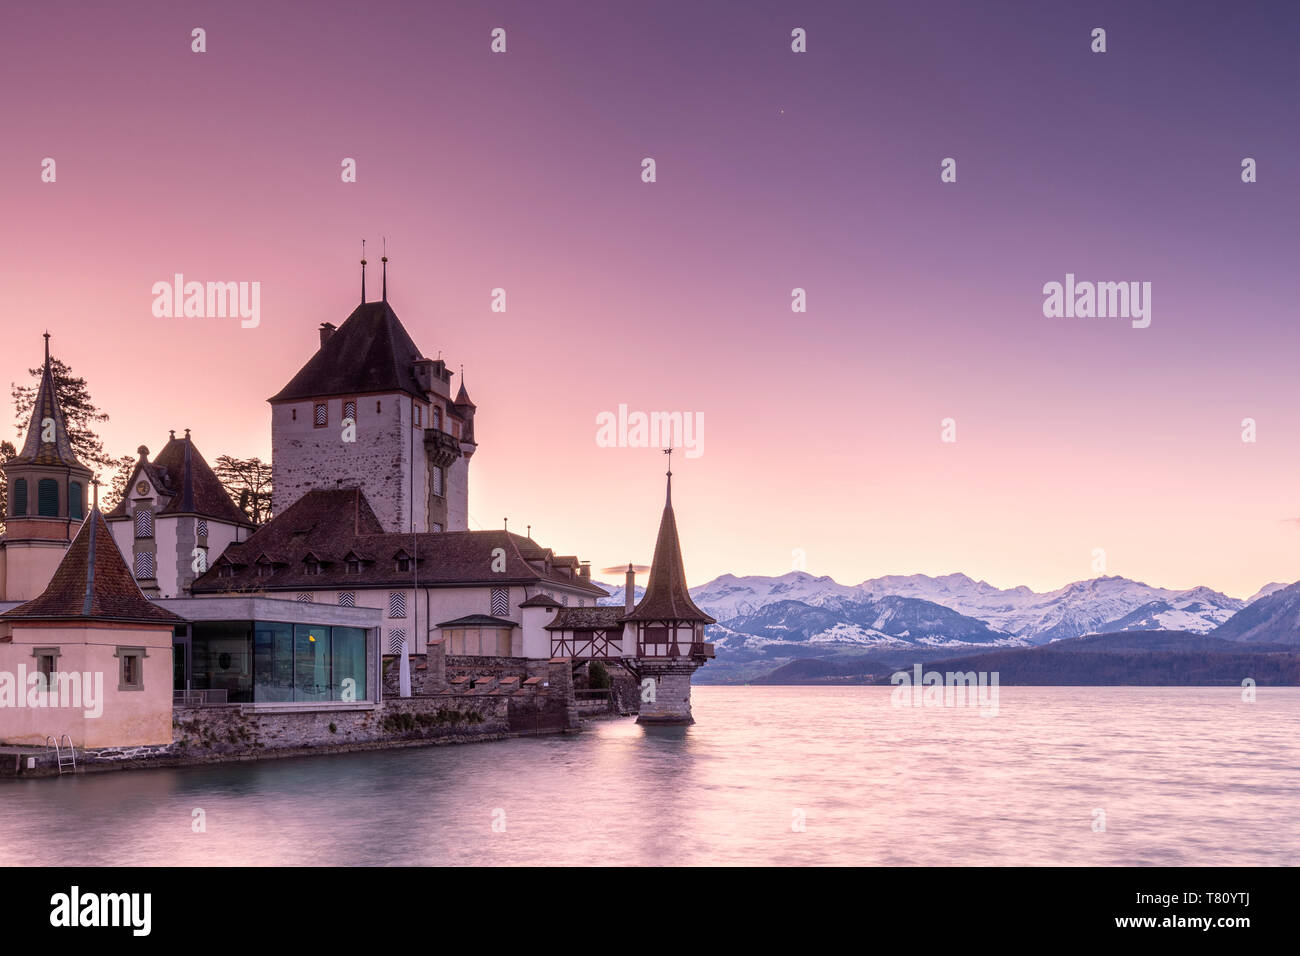 Sunrise at the castle of Oberhofen am Thunersee with the snow-covered Bernese Alps, Canton of Bern, Switzerland, Europe Stock Photo